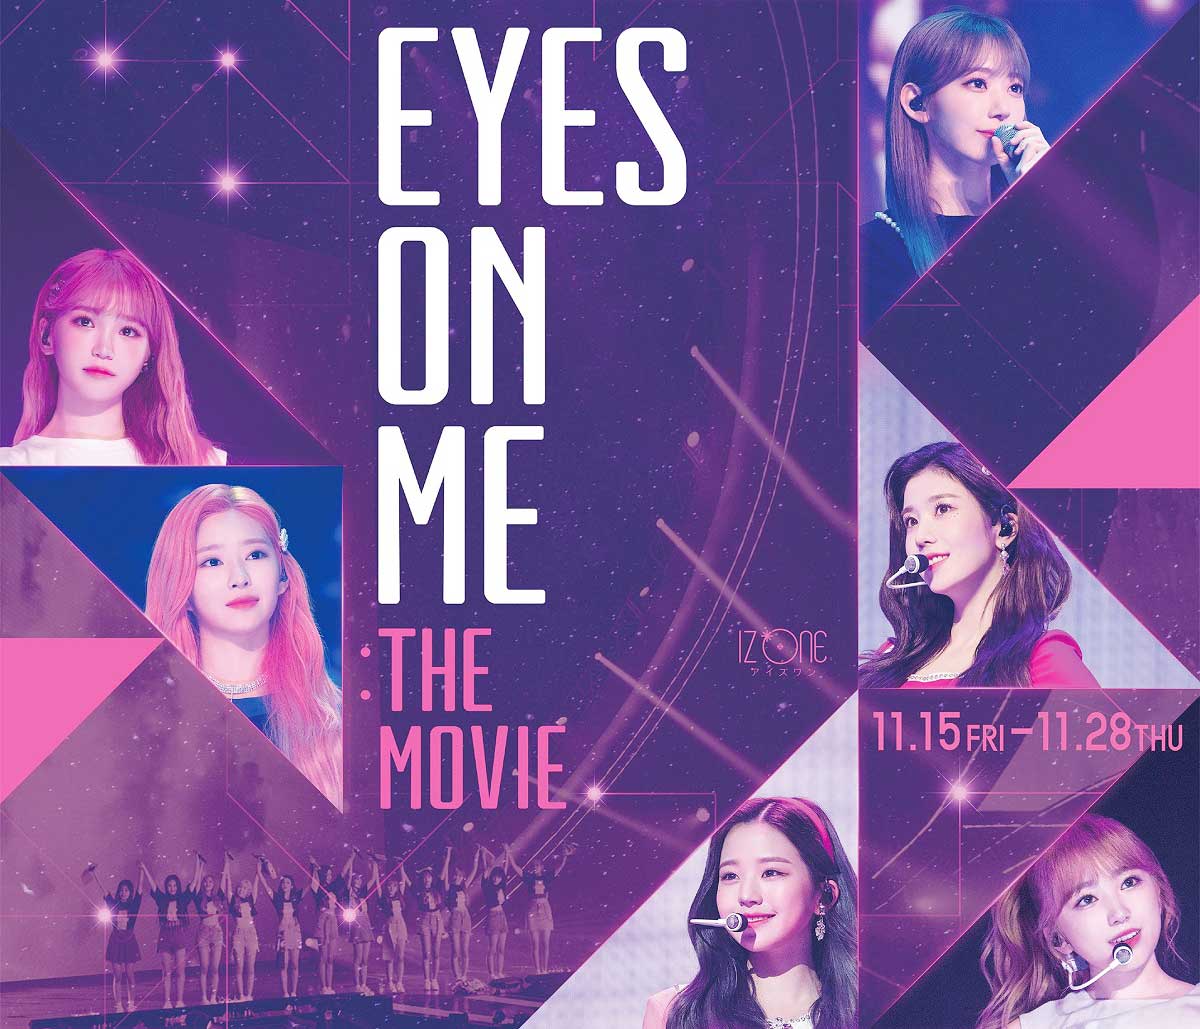 『EYES ON ME : The Movie』／©STONE MUSIC ENTERTAINMENT, OFF THE RECORD ENTERTAINMENT